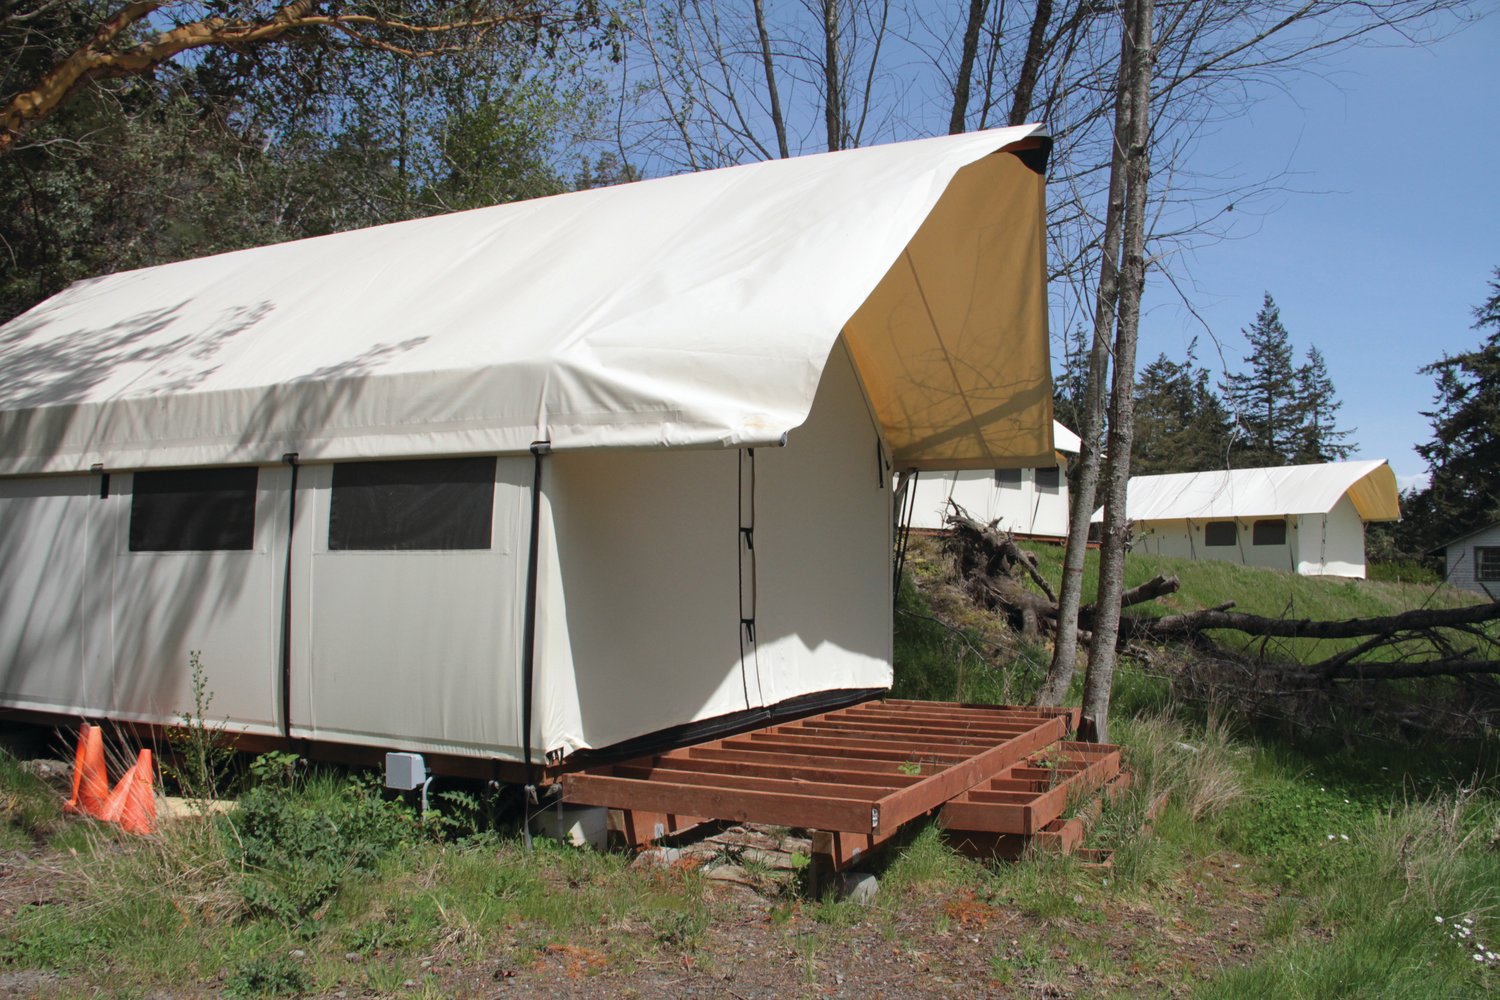 Tents at Fort Worden State Park raised for the Fort Worden PDA’s glamorous camping project sit unfinished and unused at the park.